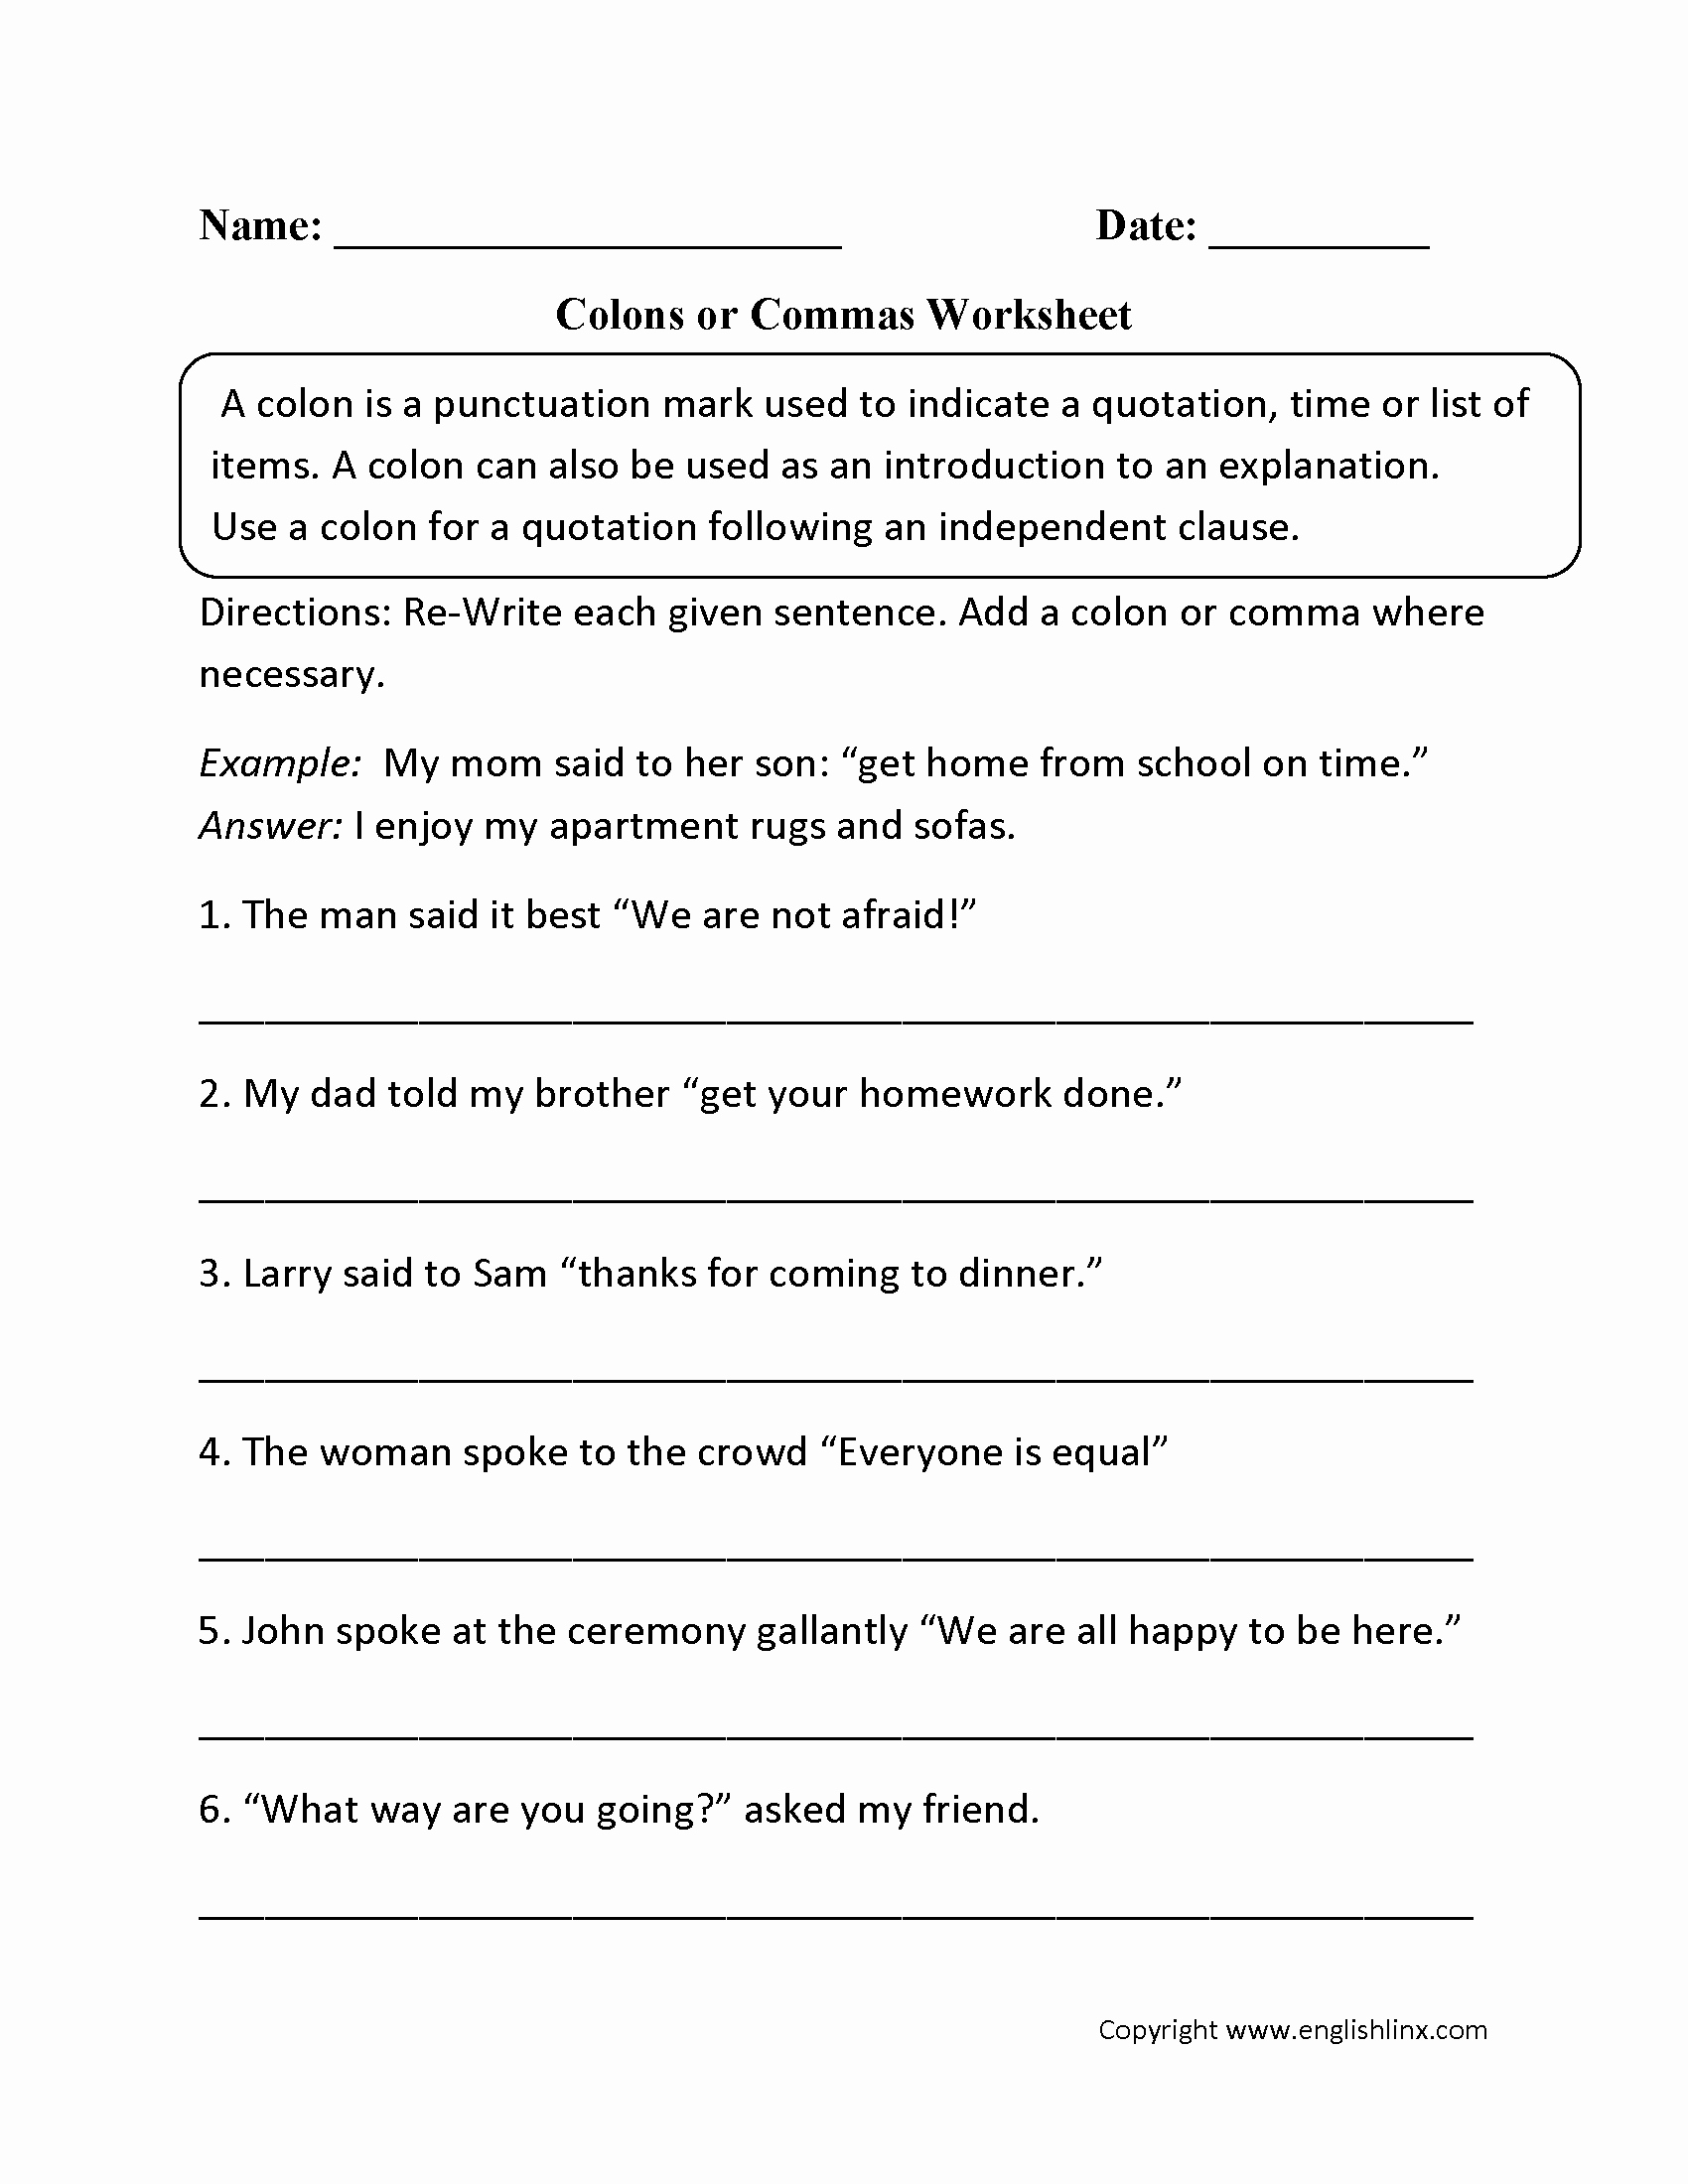 Semicolon and Colon Worksheet Luxury Punctuation Worksheets